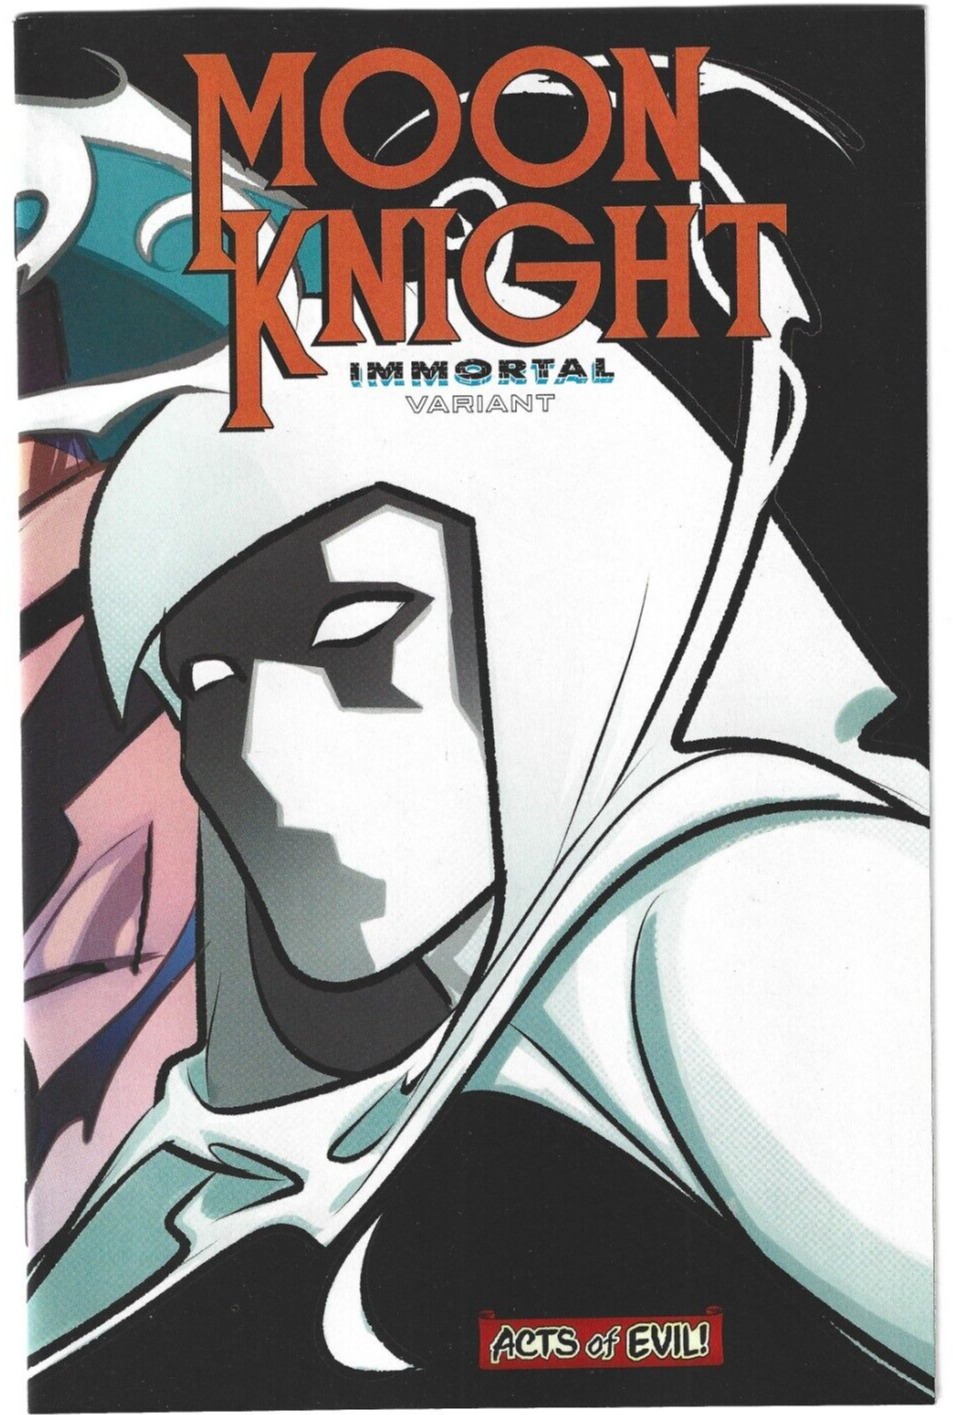 Moon Knight Annual #1 - Immortal Variant Wraparound Cover